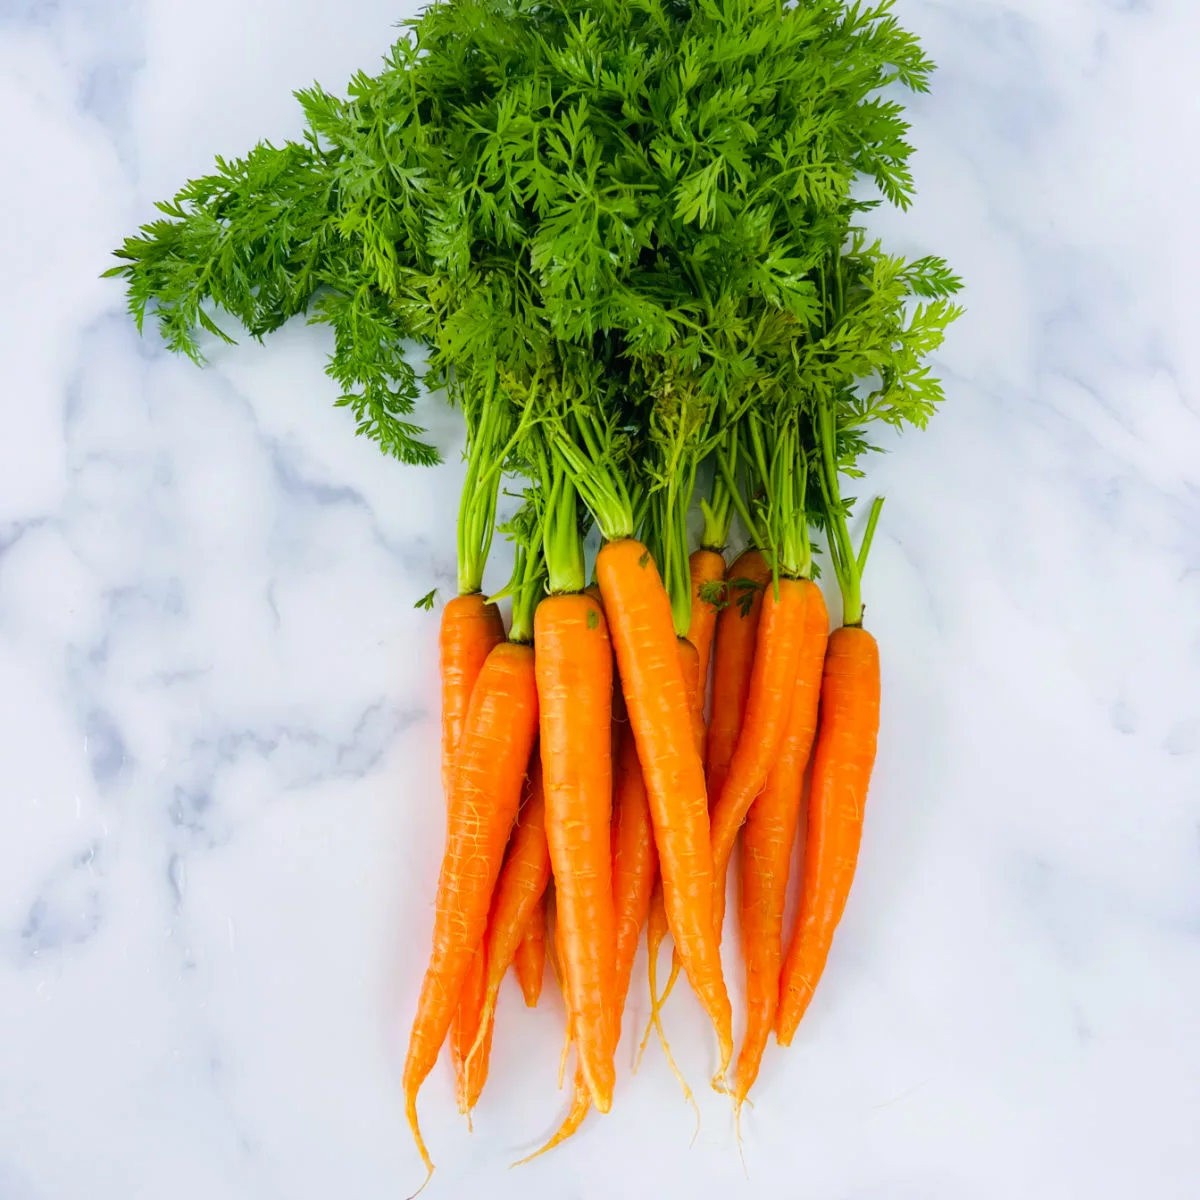 Dutch carrots or baby carrots.